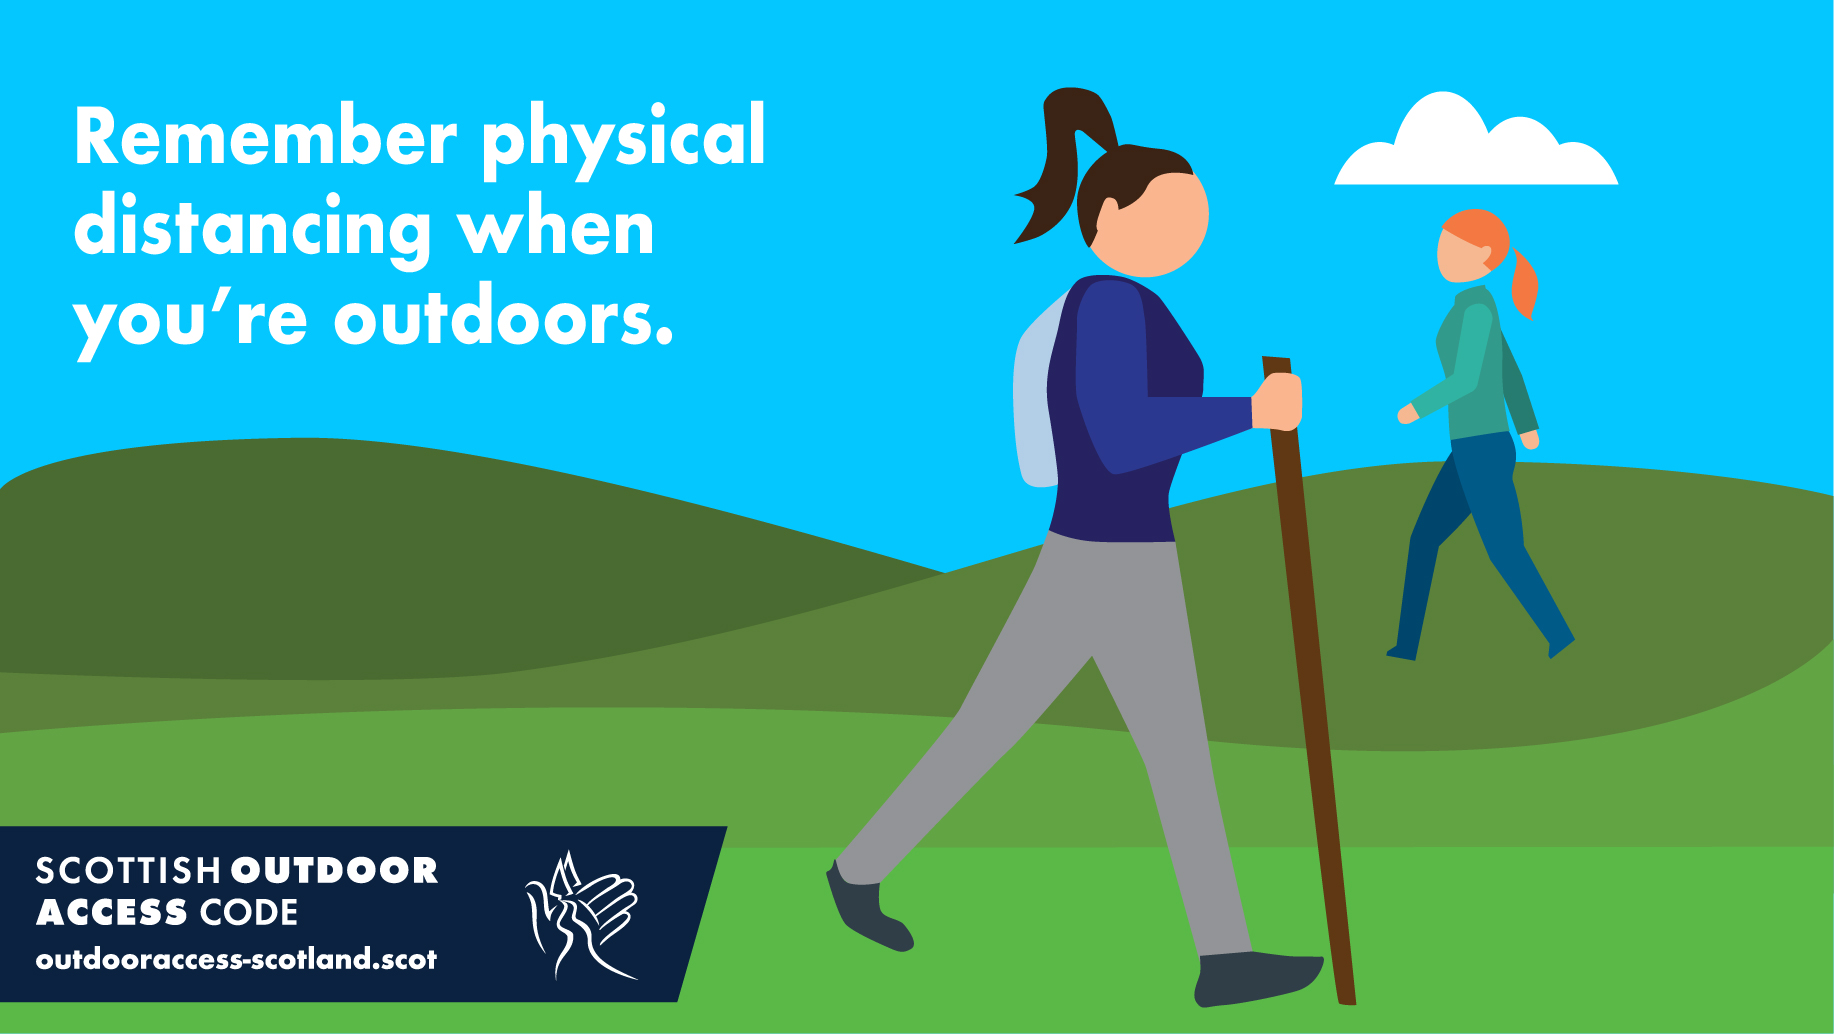 Remember physical distancing when outdoors.